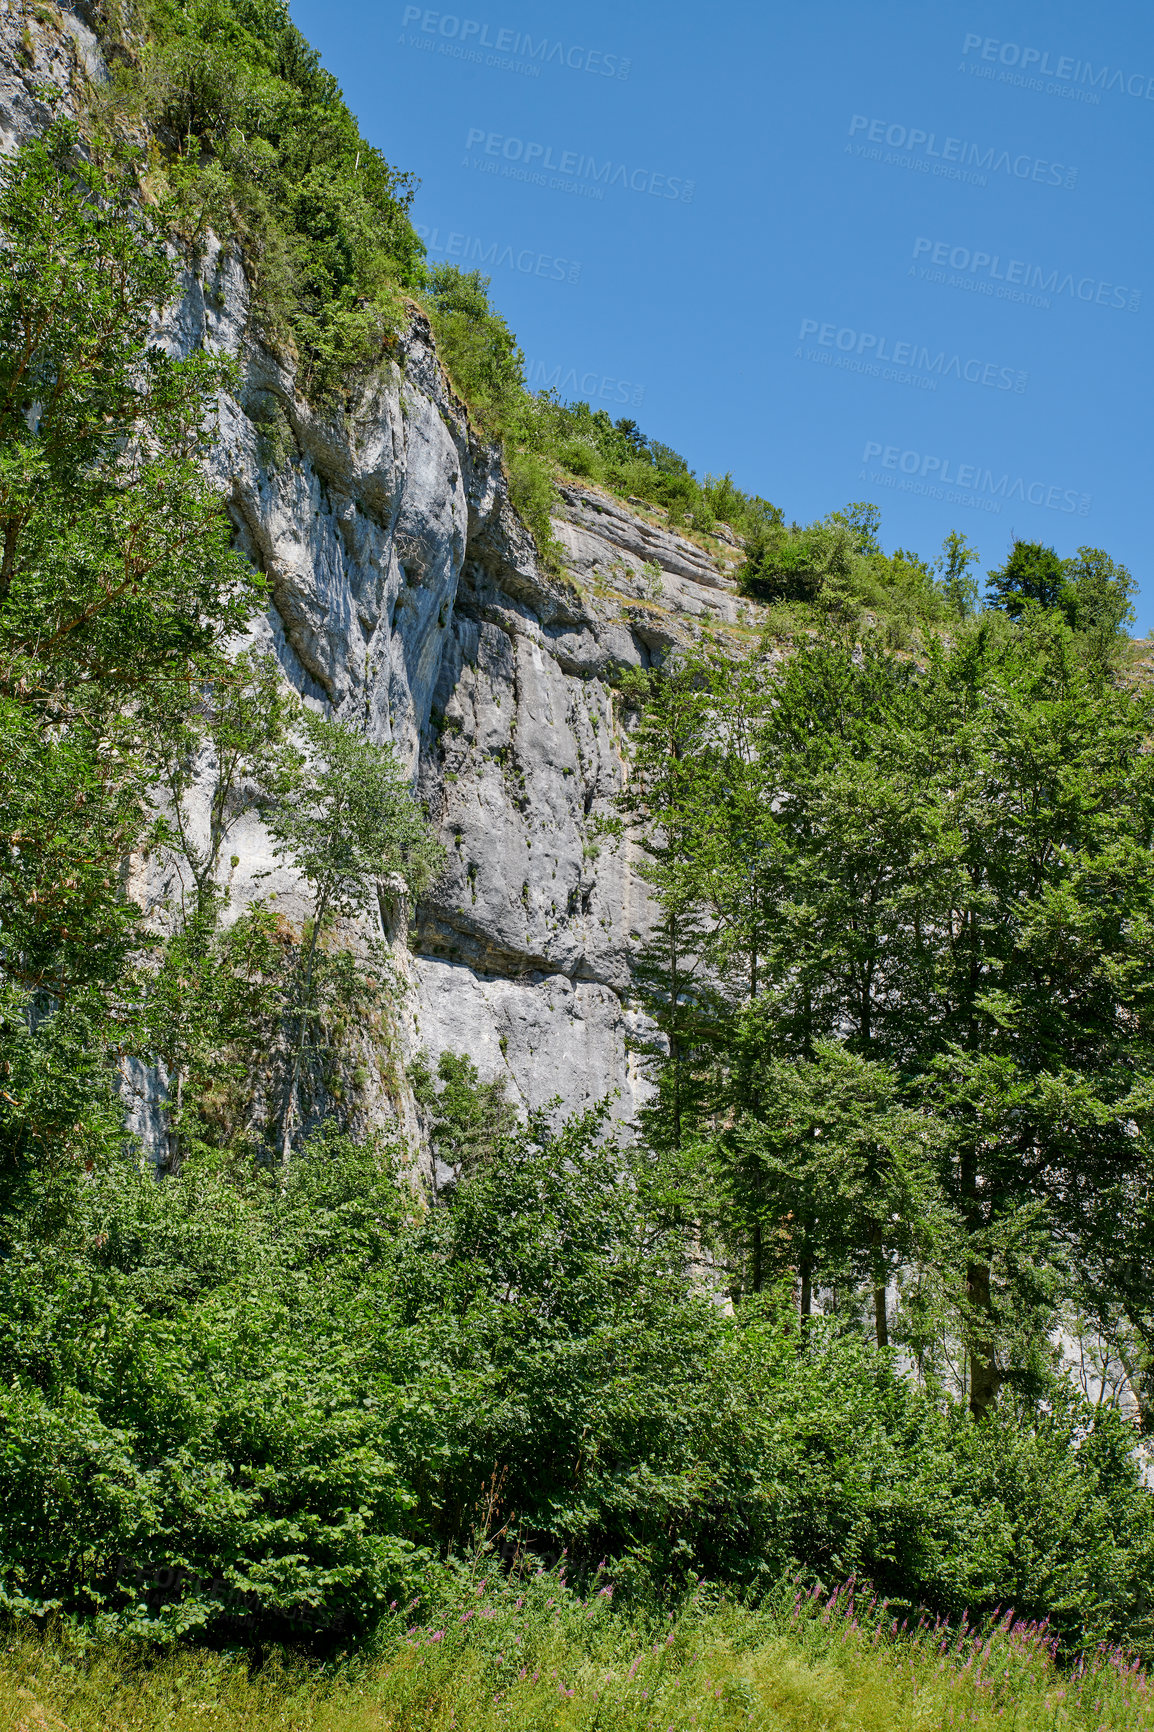 Buy stock photo Landscape mountain view of steep stone cliffs and lush green foliage with trees in remote countryside or a nature reserve. Environment conservation of scenic hiking rock climbing location for tourism